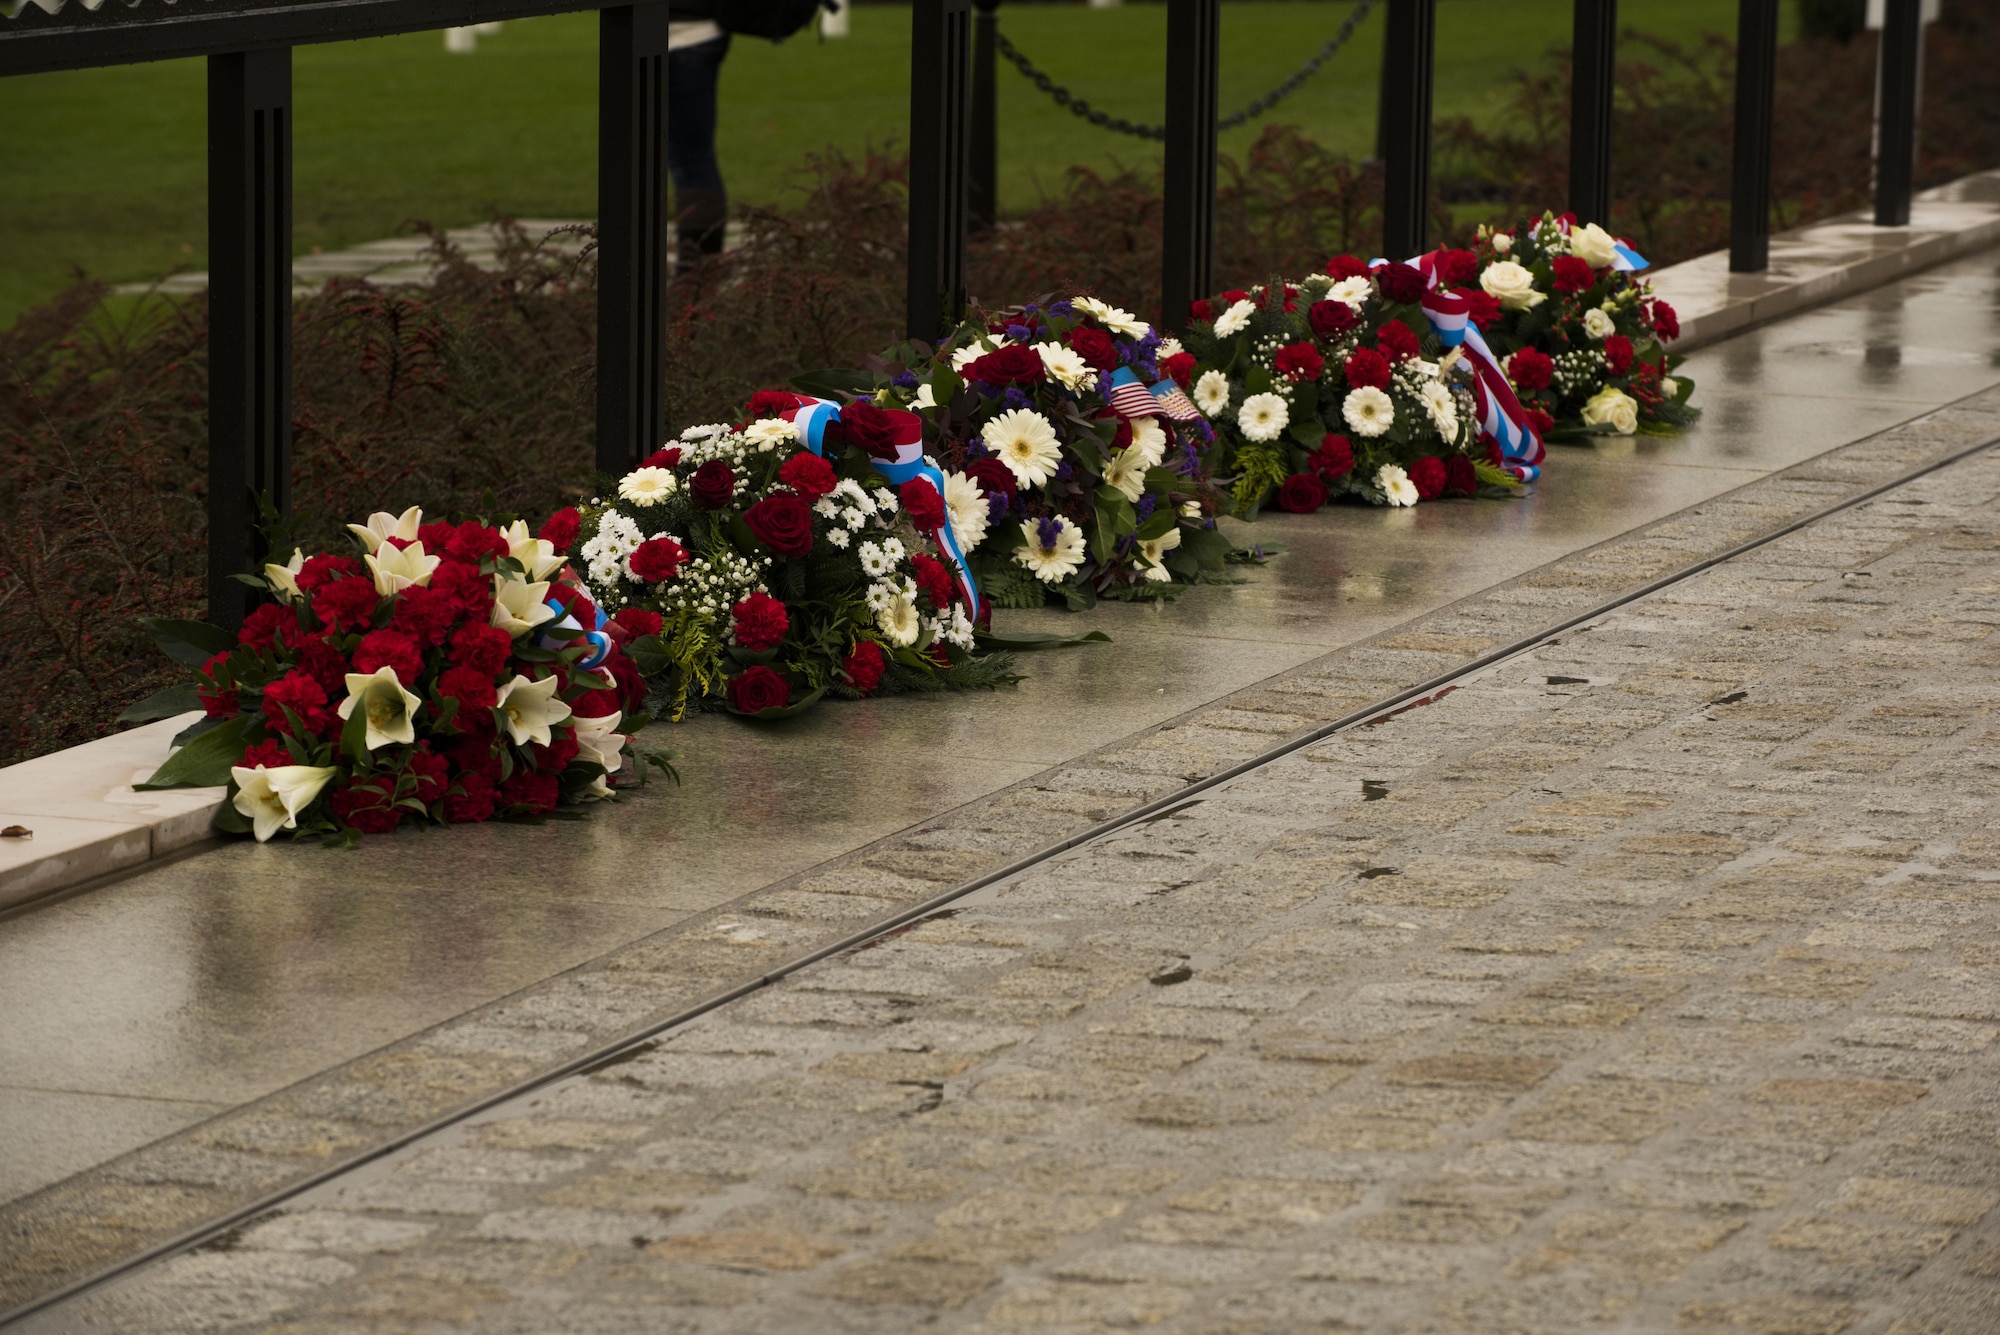 A collection of wreaths remain on display during a Memorial Day ceremony at the Luxembourg American Military Cemetery and Memorial in Luxembourg, Nov. 11, 2016. The ceremony paid tribute to the legacy of service of members of the American armed forces. (U.S. Air Force photo by Staff Sgt. Joe W. McFadden)